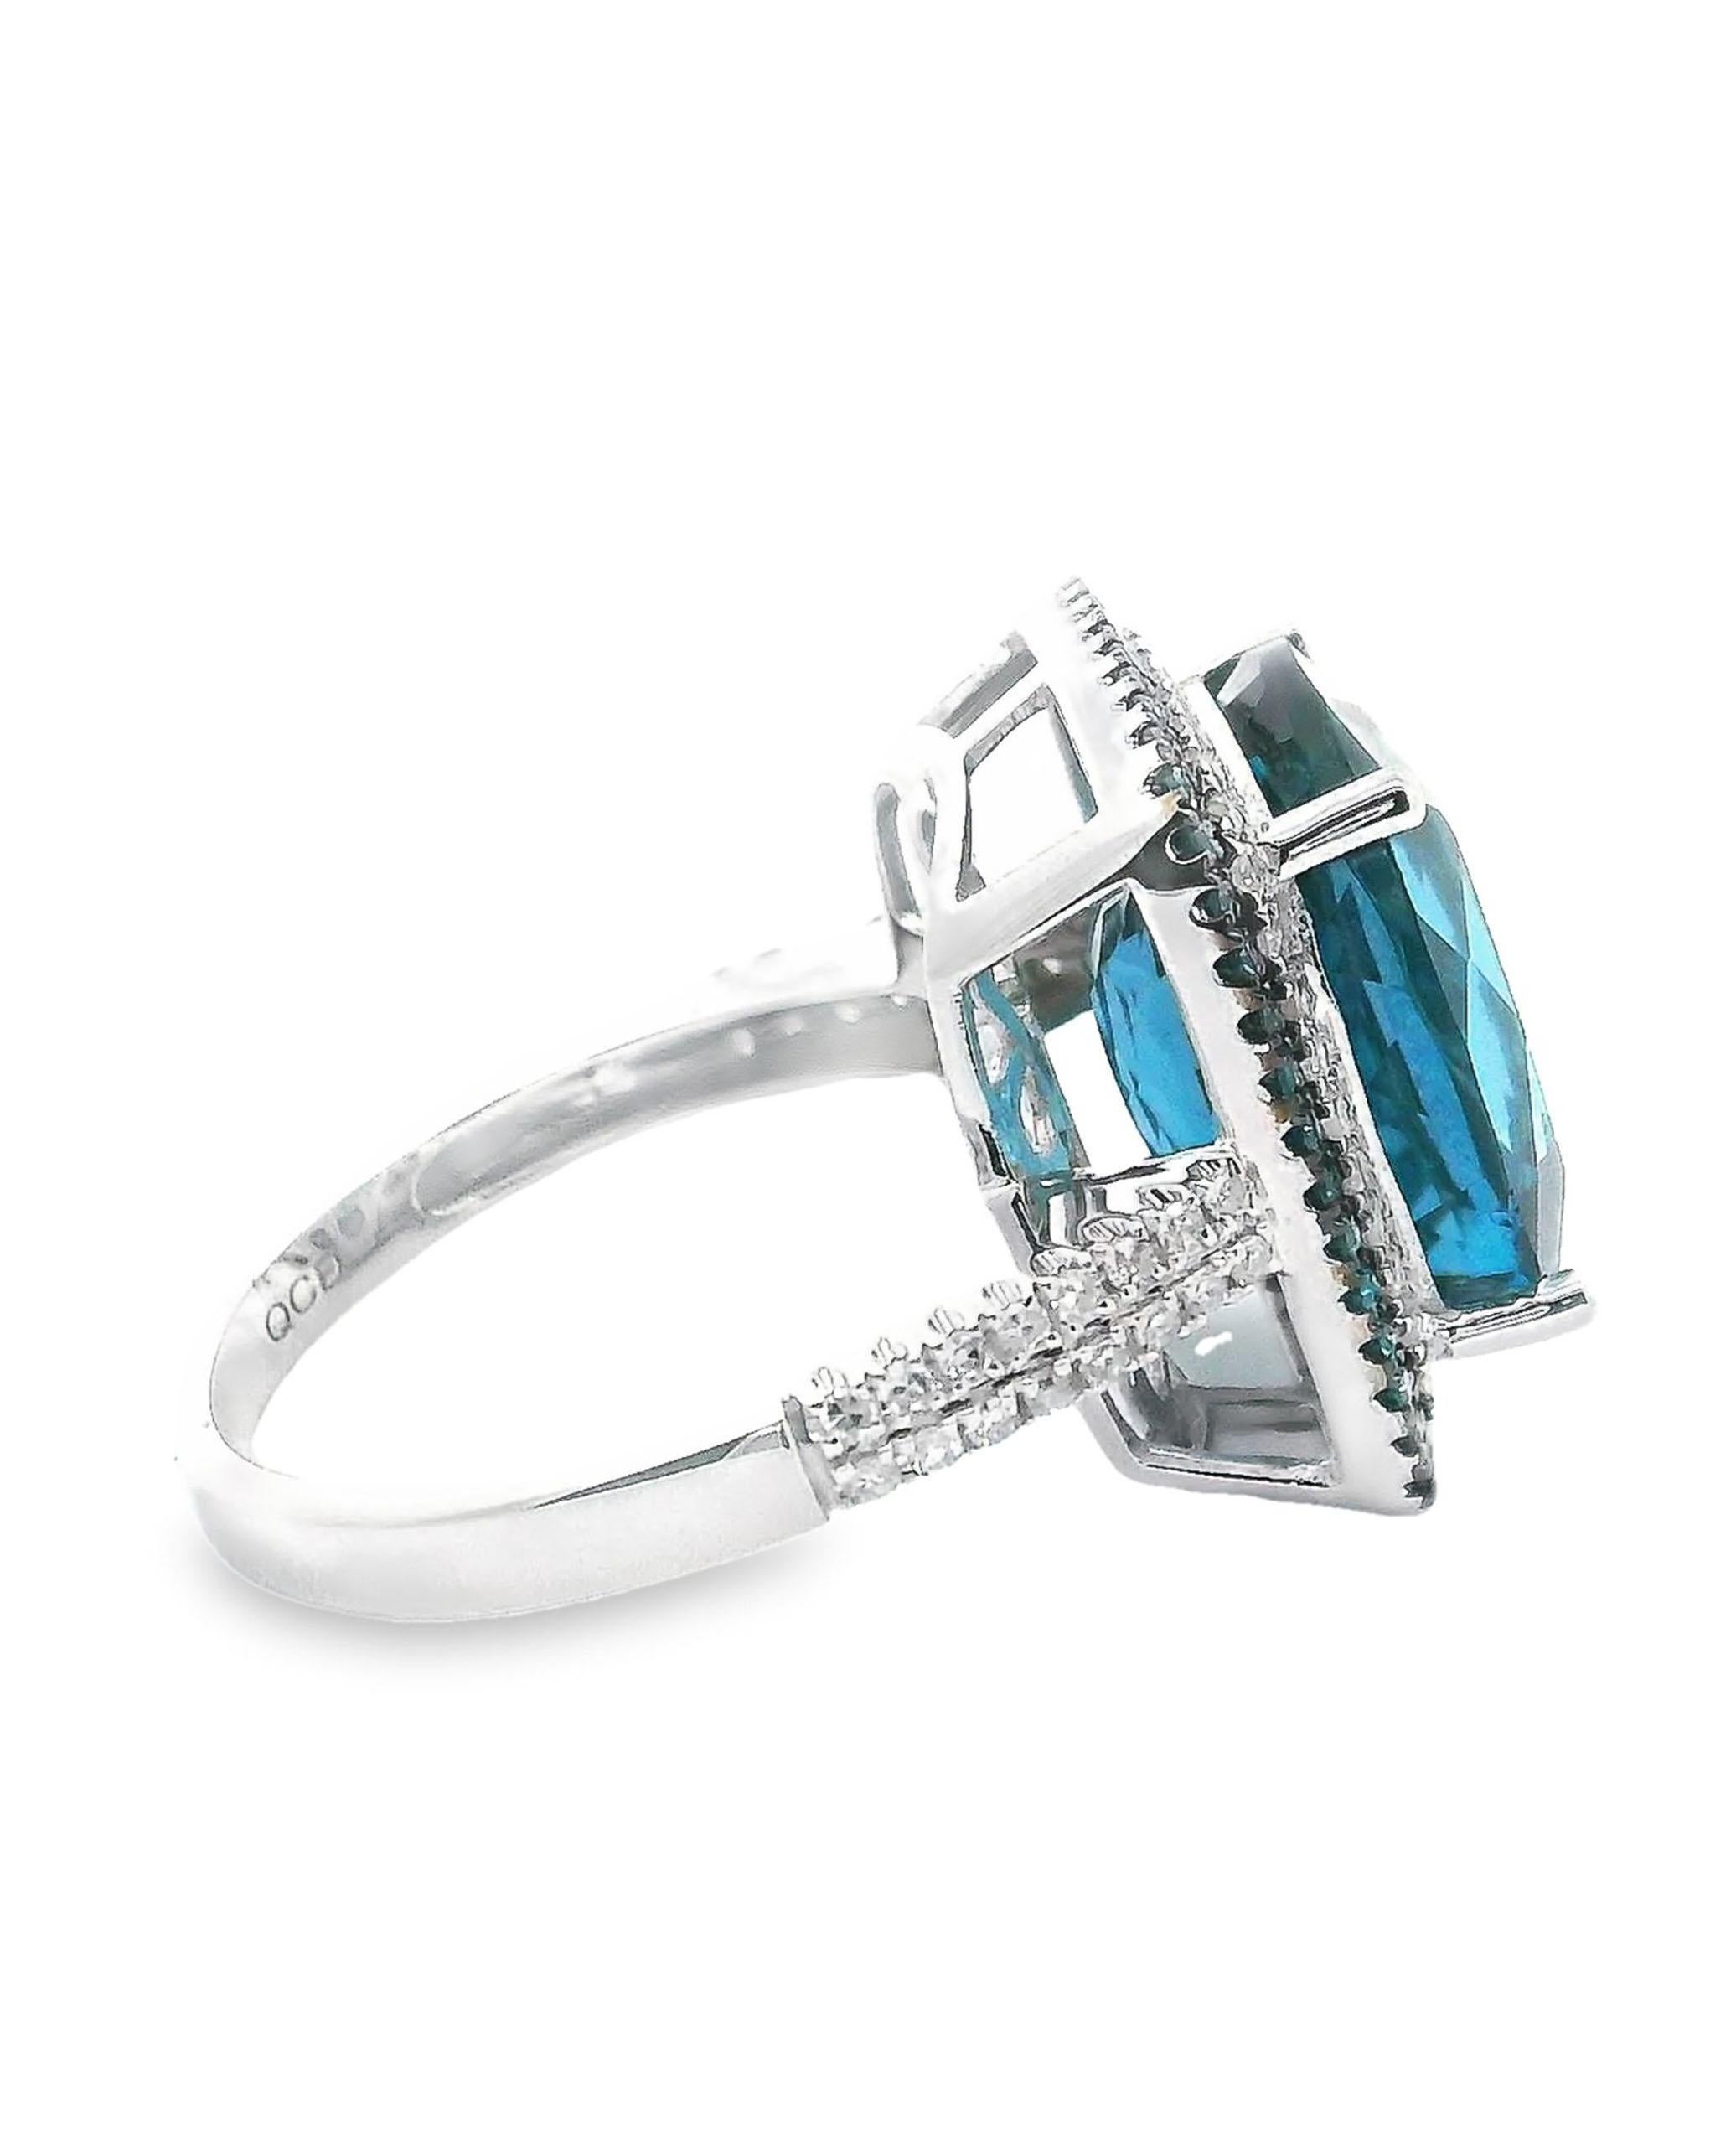 14K white gold halo fashion ring. The halo and shank are furnished with round faceted blue treated diamonds and white faceted diamonds weighing 0.54 carats total. In the center, one faceted cushion shape London blue topaz weighing 10.97 carats. 

-